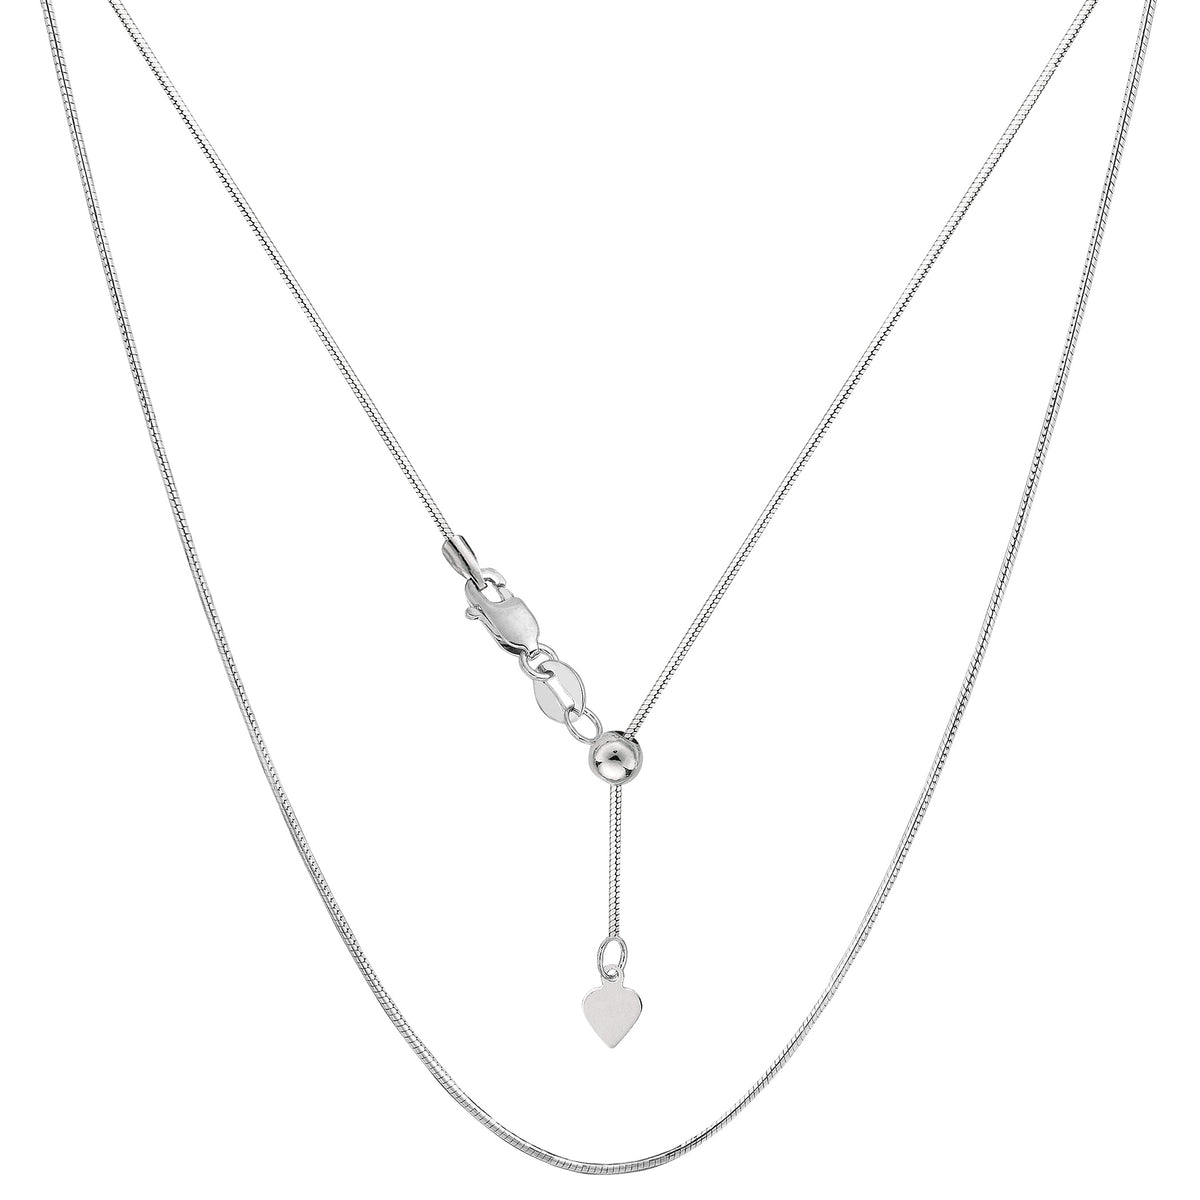 14k White Gold Adjustable Octagonal Snake Chain Necklace, 0.85mm, 22" fine designer jewelry for men and women